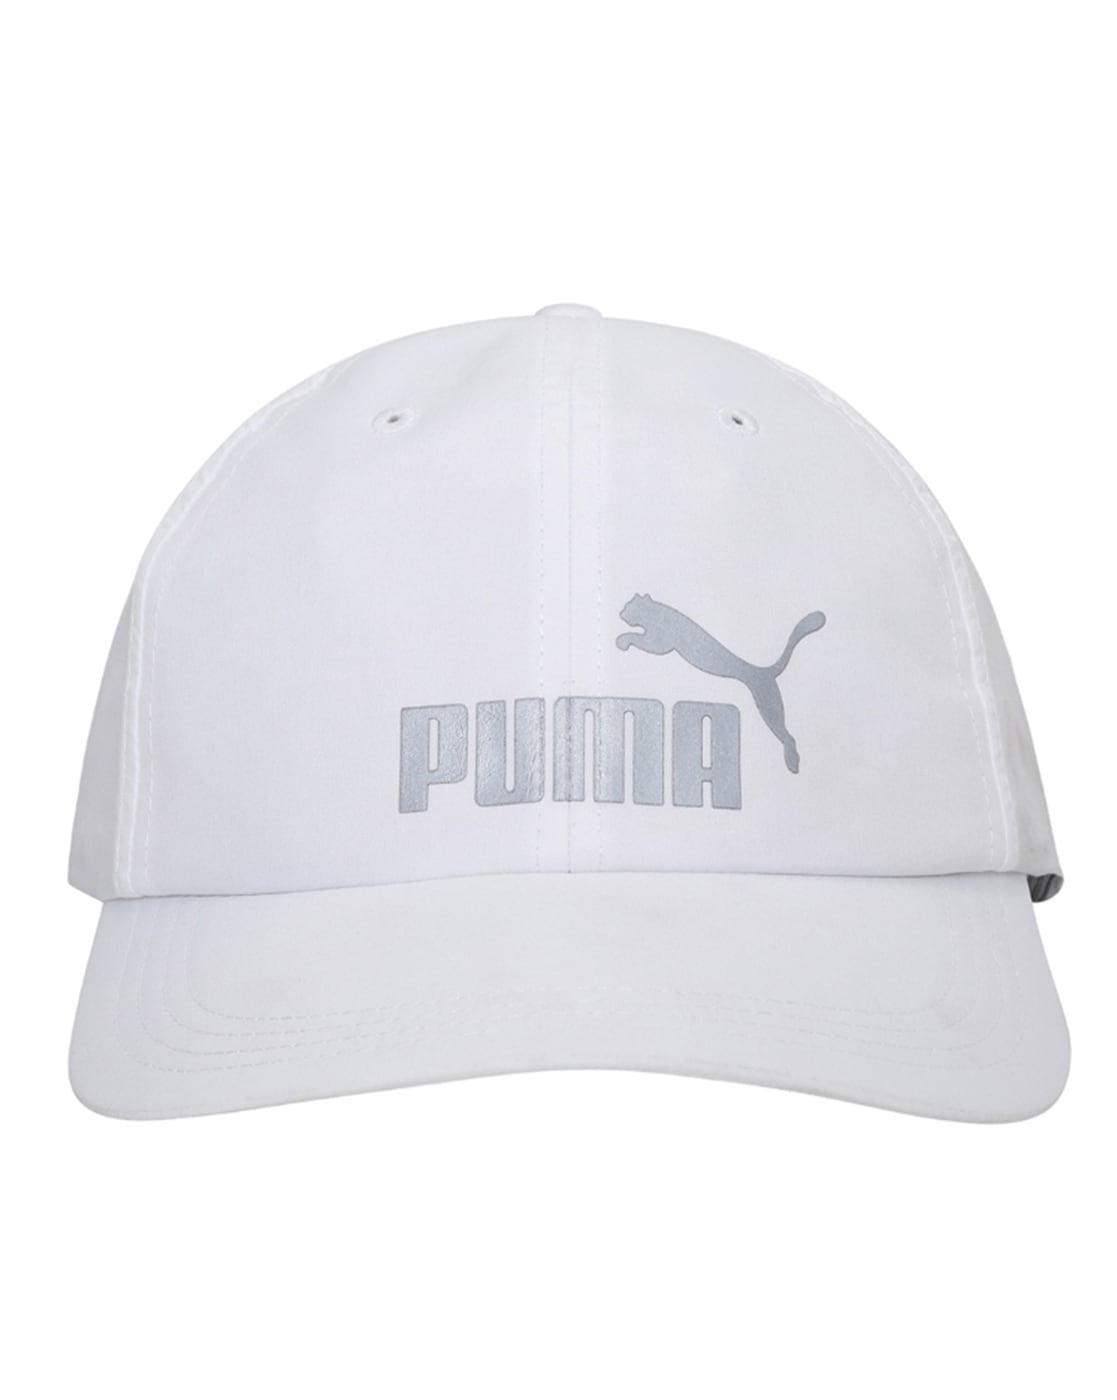 Caps Puma White for by Buy Hats & Men Online